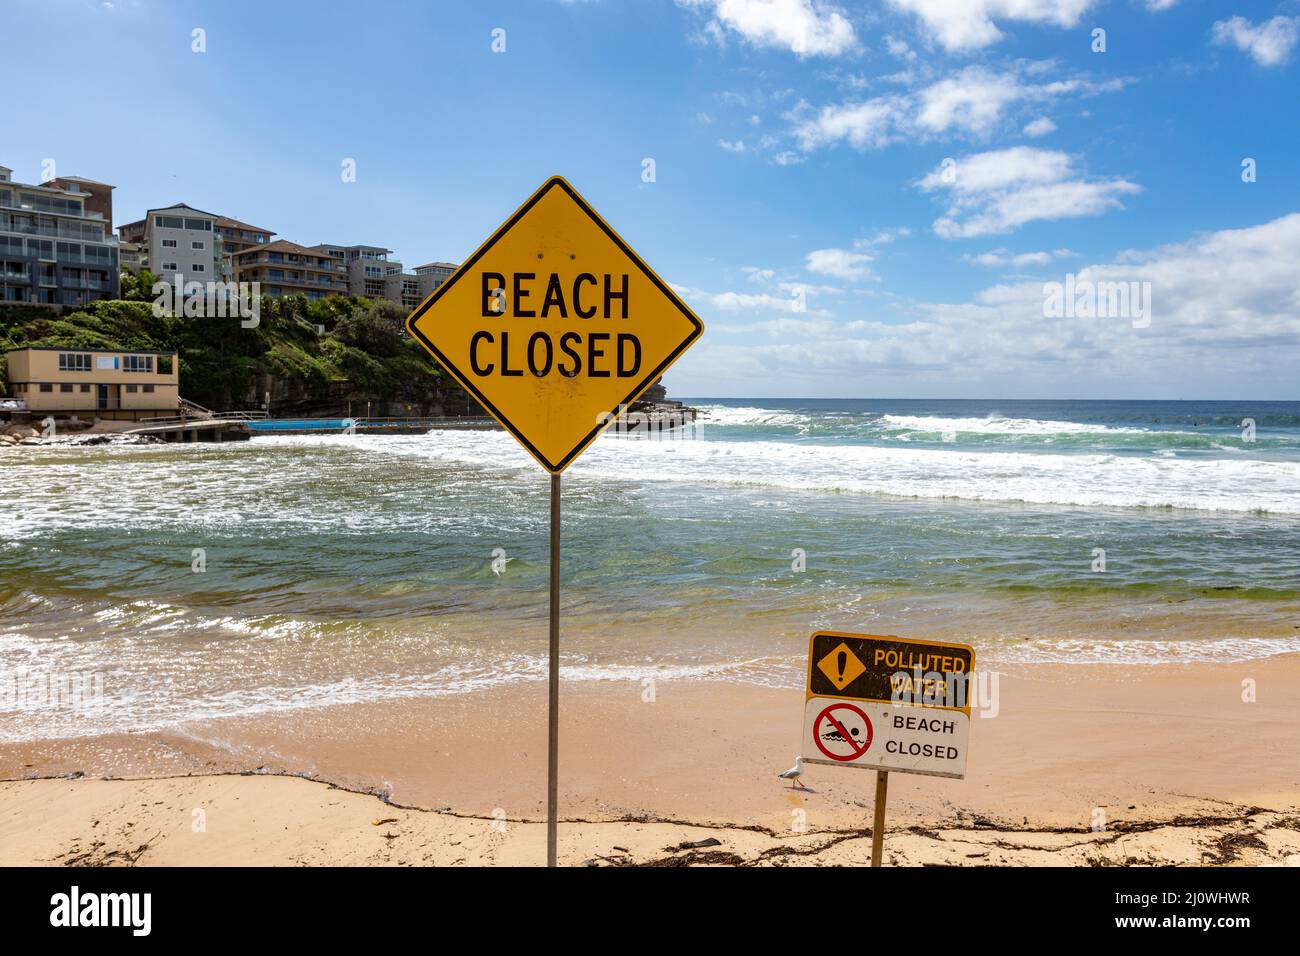 Queenscliff beach in Manly Sydney is closed due to polluted water arising from the floods and heavy rains in March 2022,NSW, Australia Stock Photo